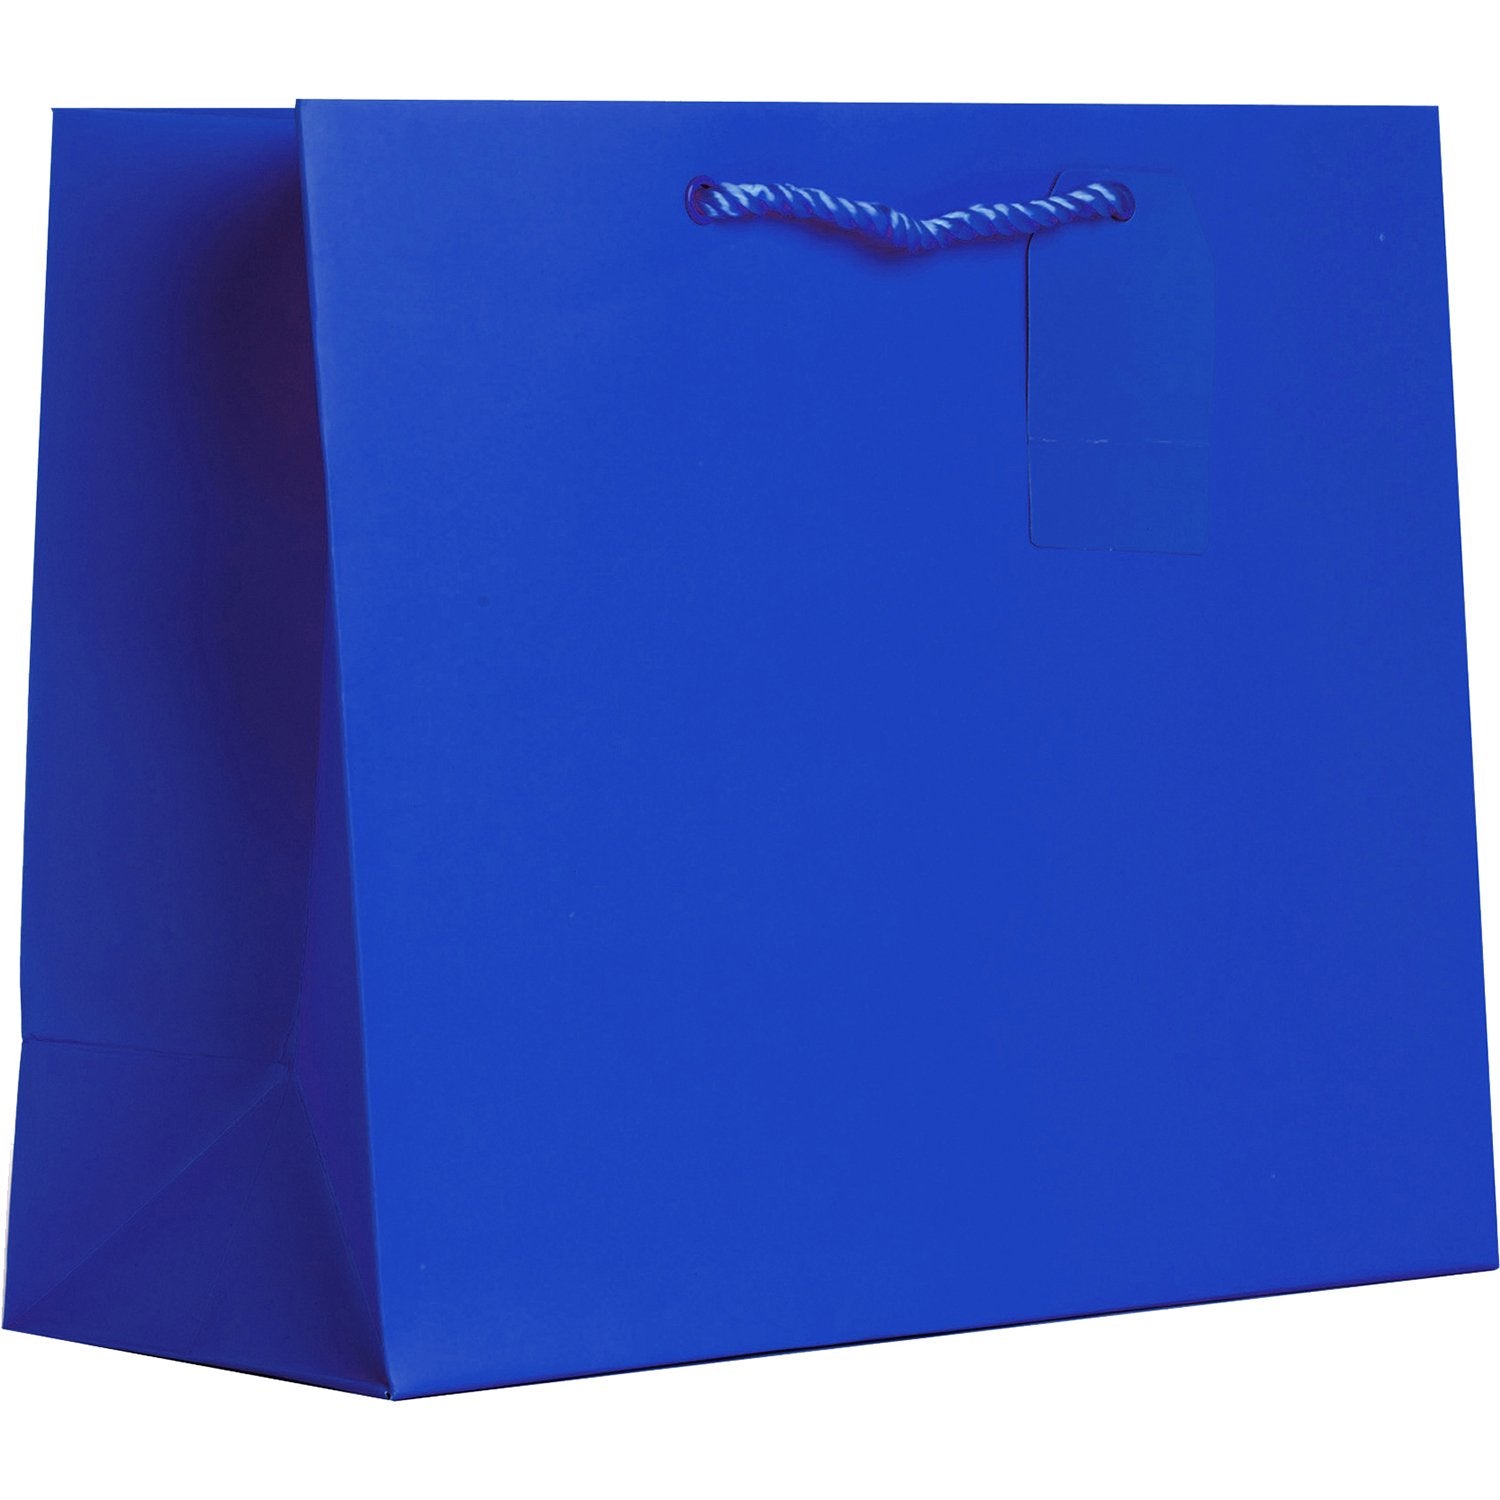 Heavyweight Solid Color Large Gift Bags, Matte Royal Blue